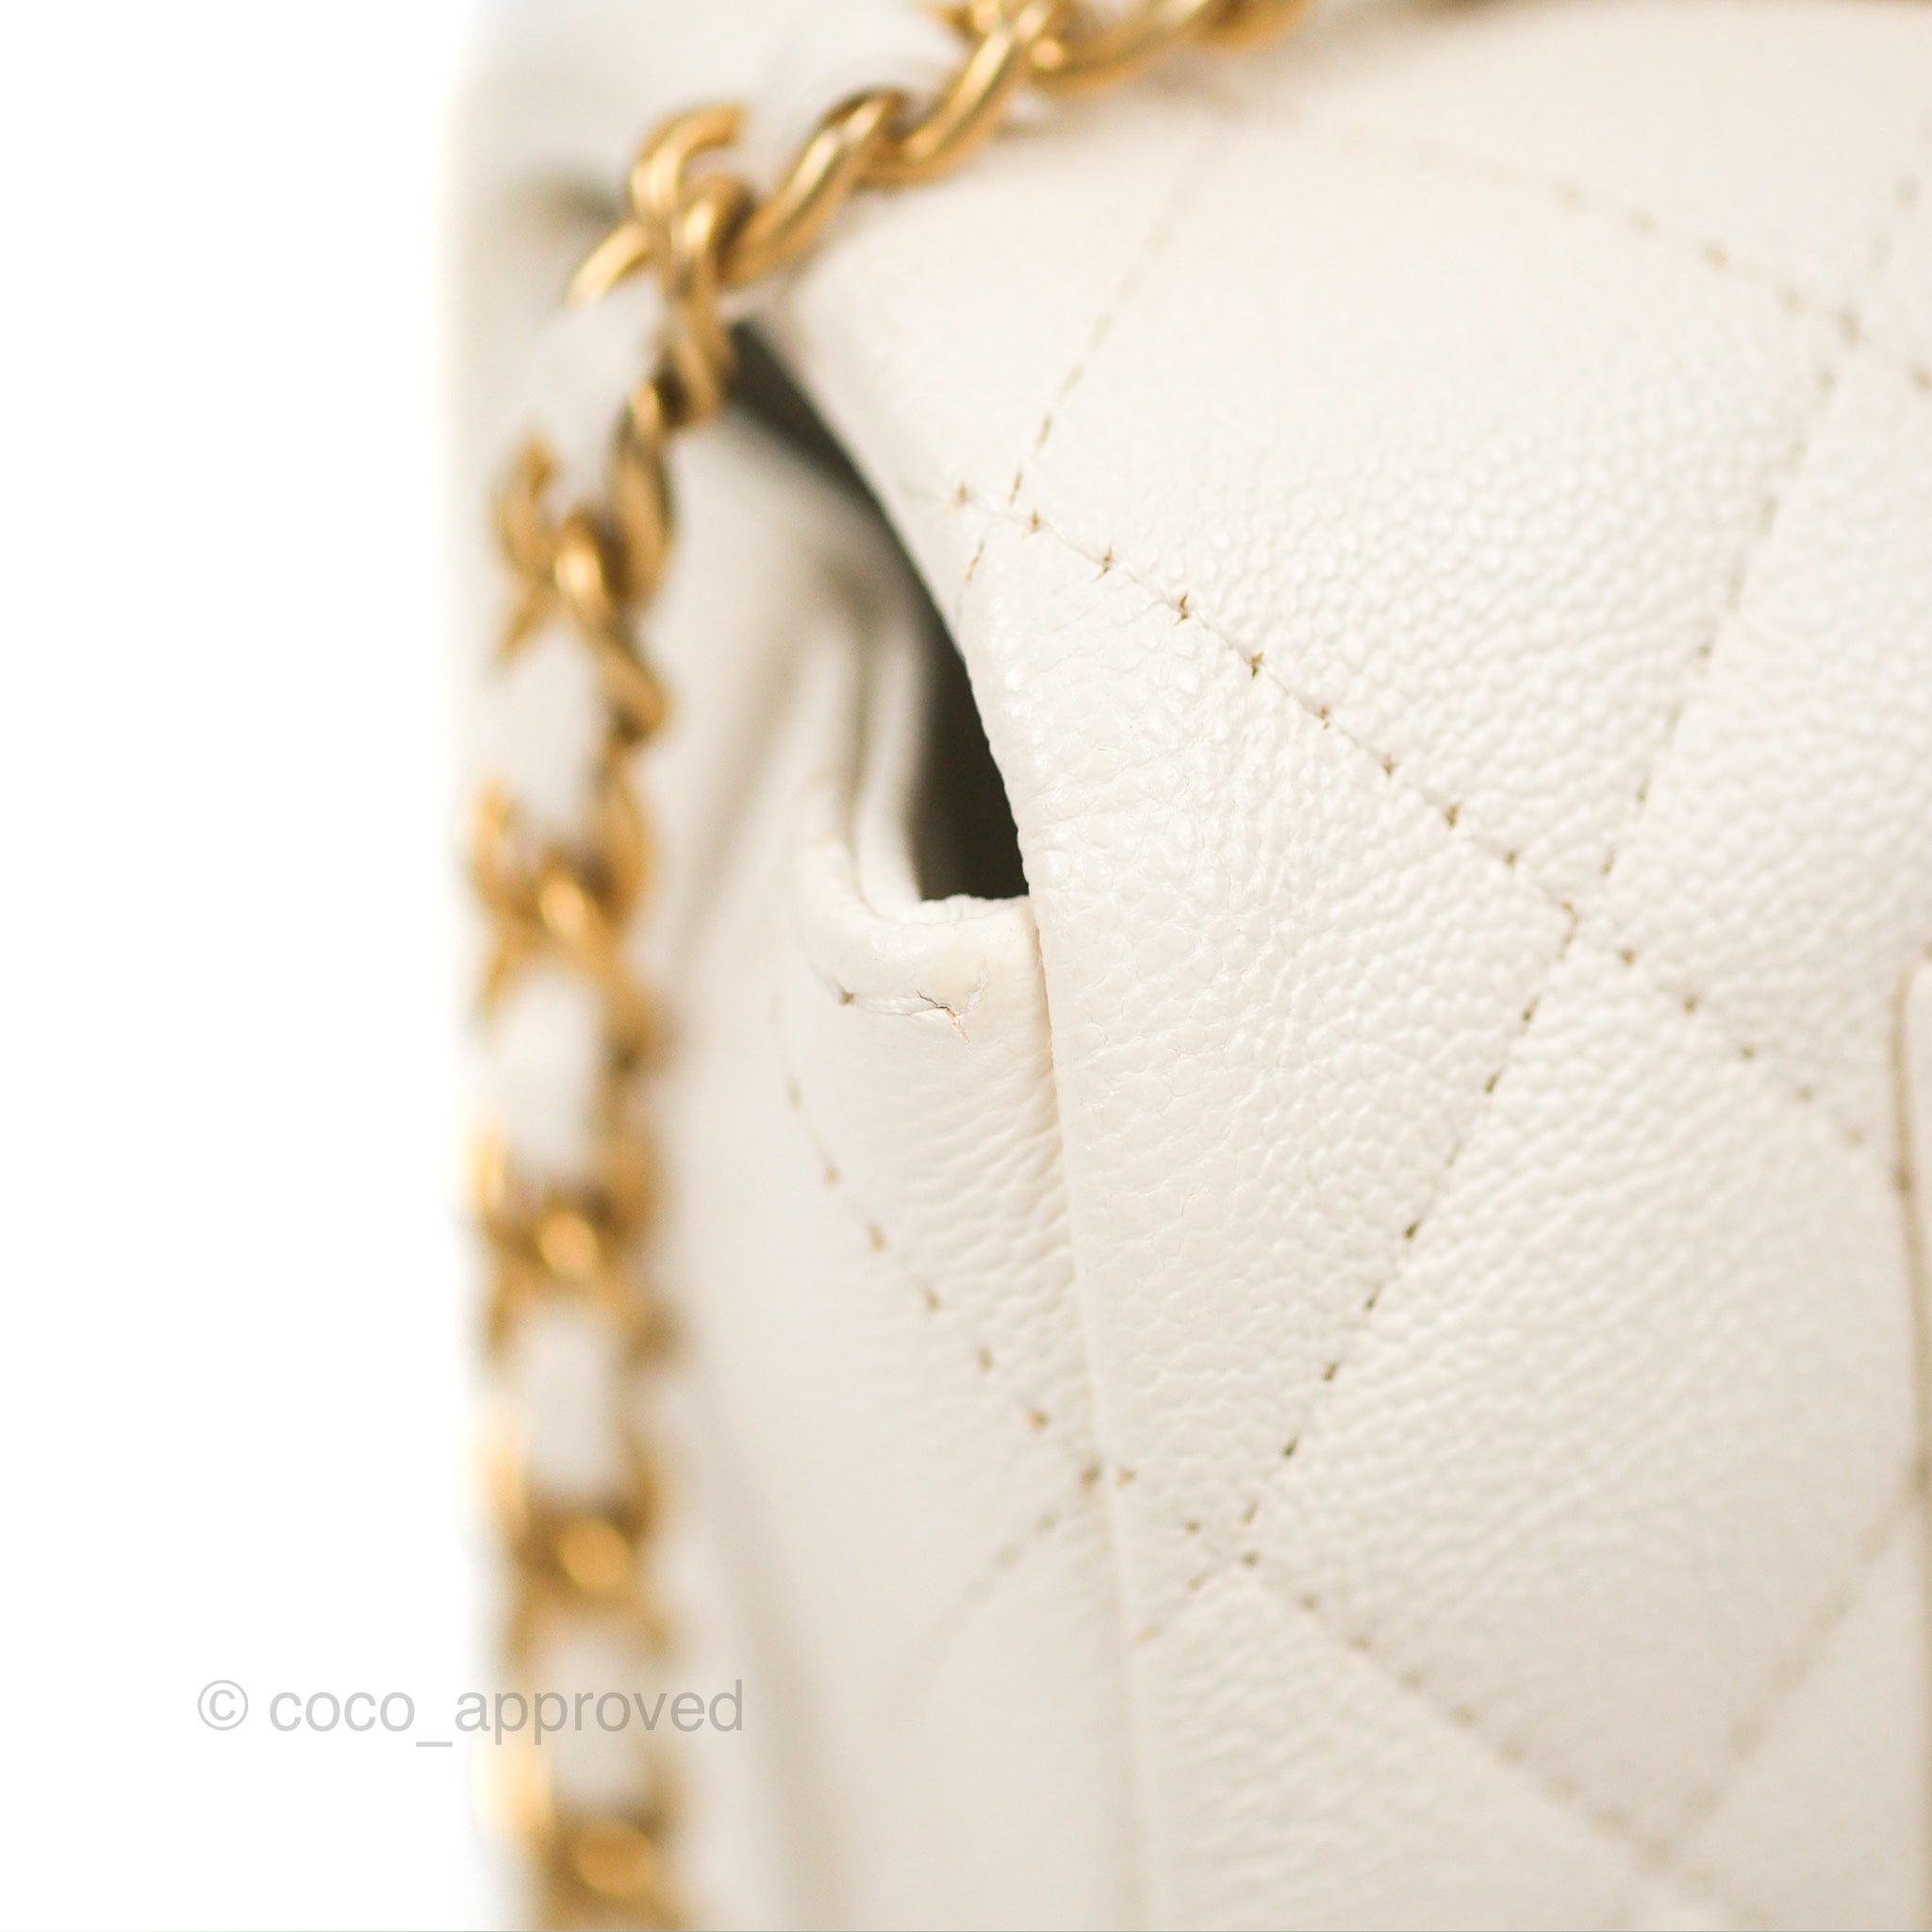 Chanel Top Handle Mini Rectangular Flap Bag White Caviar Aged Gold Har –  Coco Approved Studio